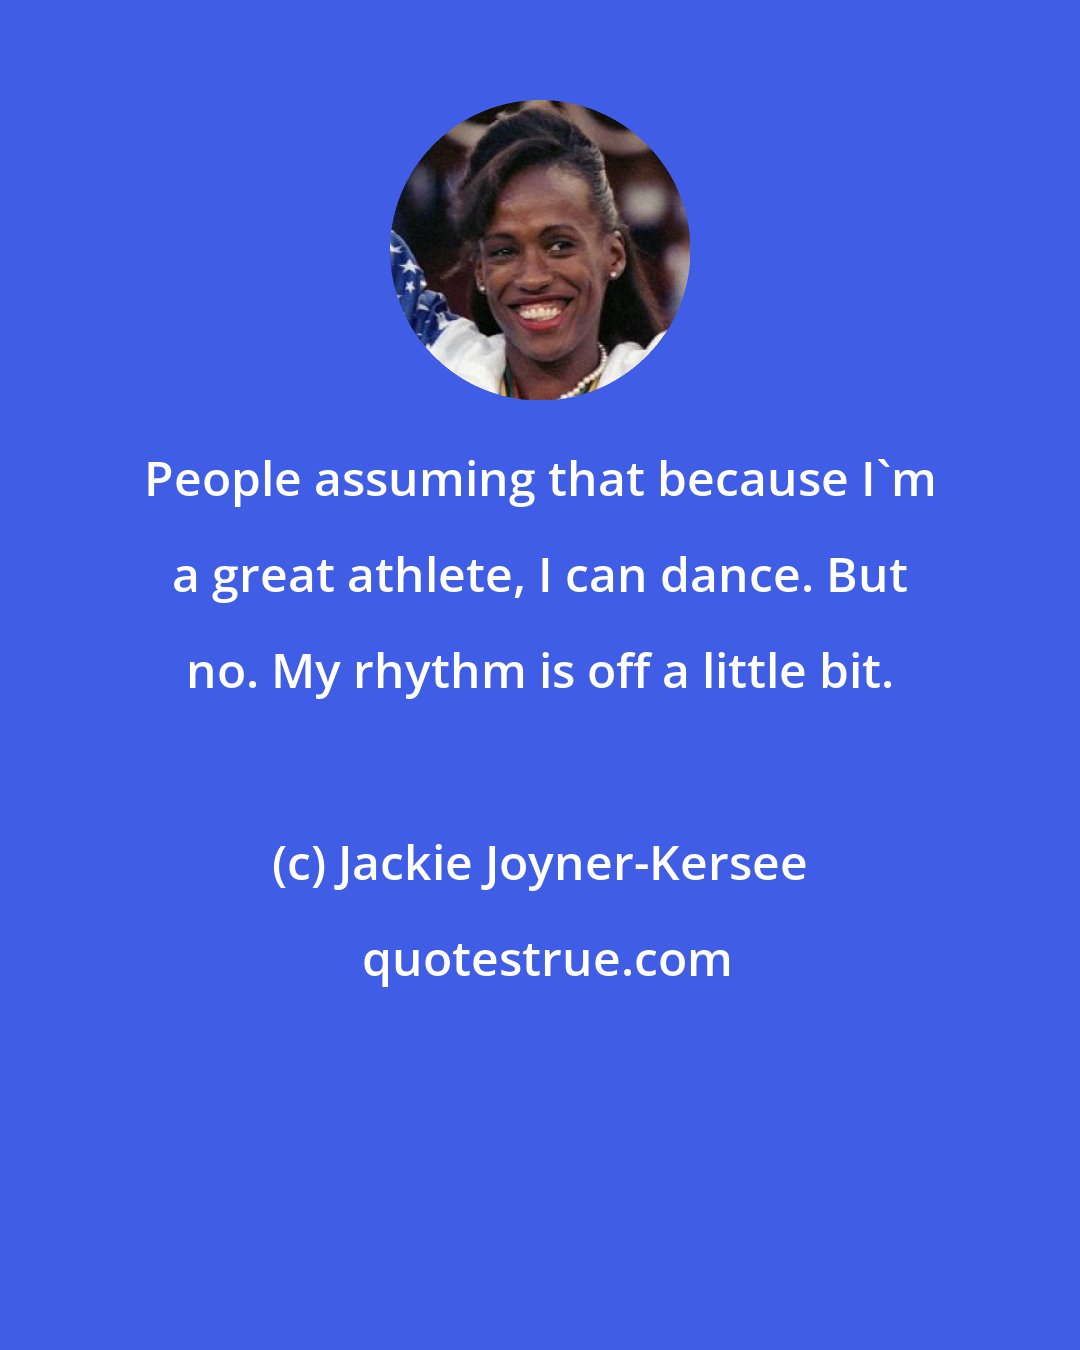 Jackie Joyner-Kersee: People assuming that because I'm a great athlete, I can dance. But no. My rhythm is off a little bit.